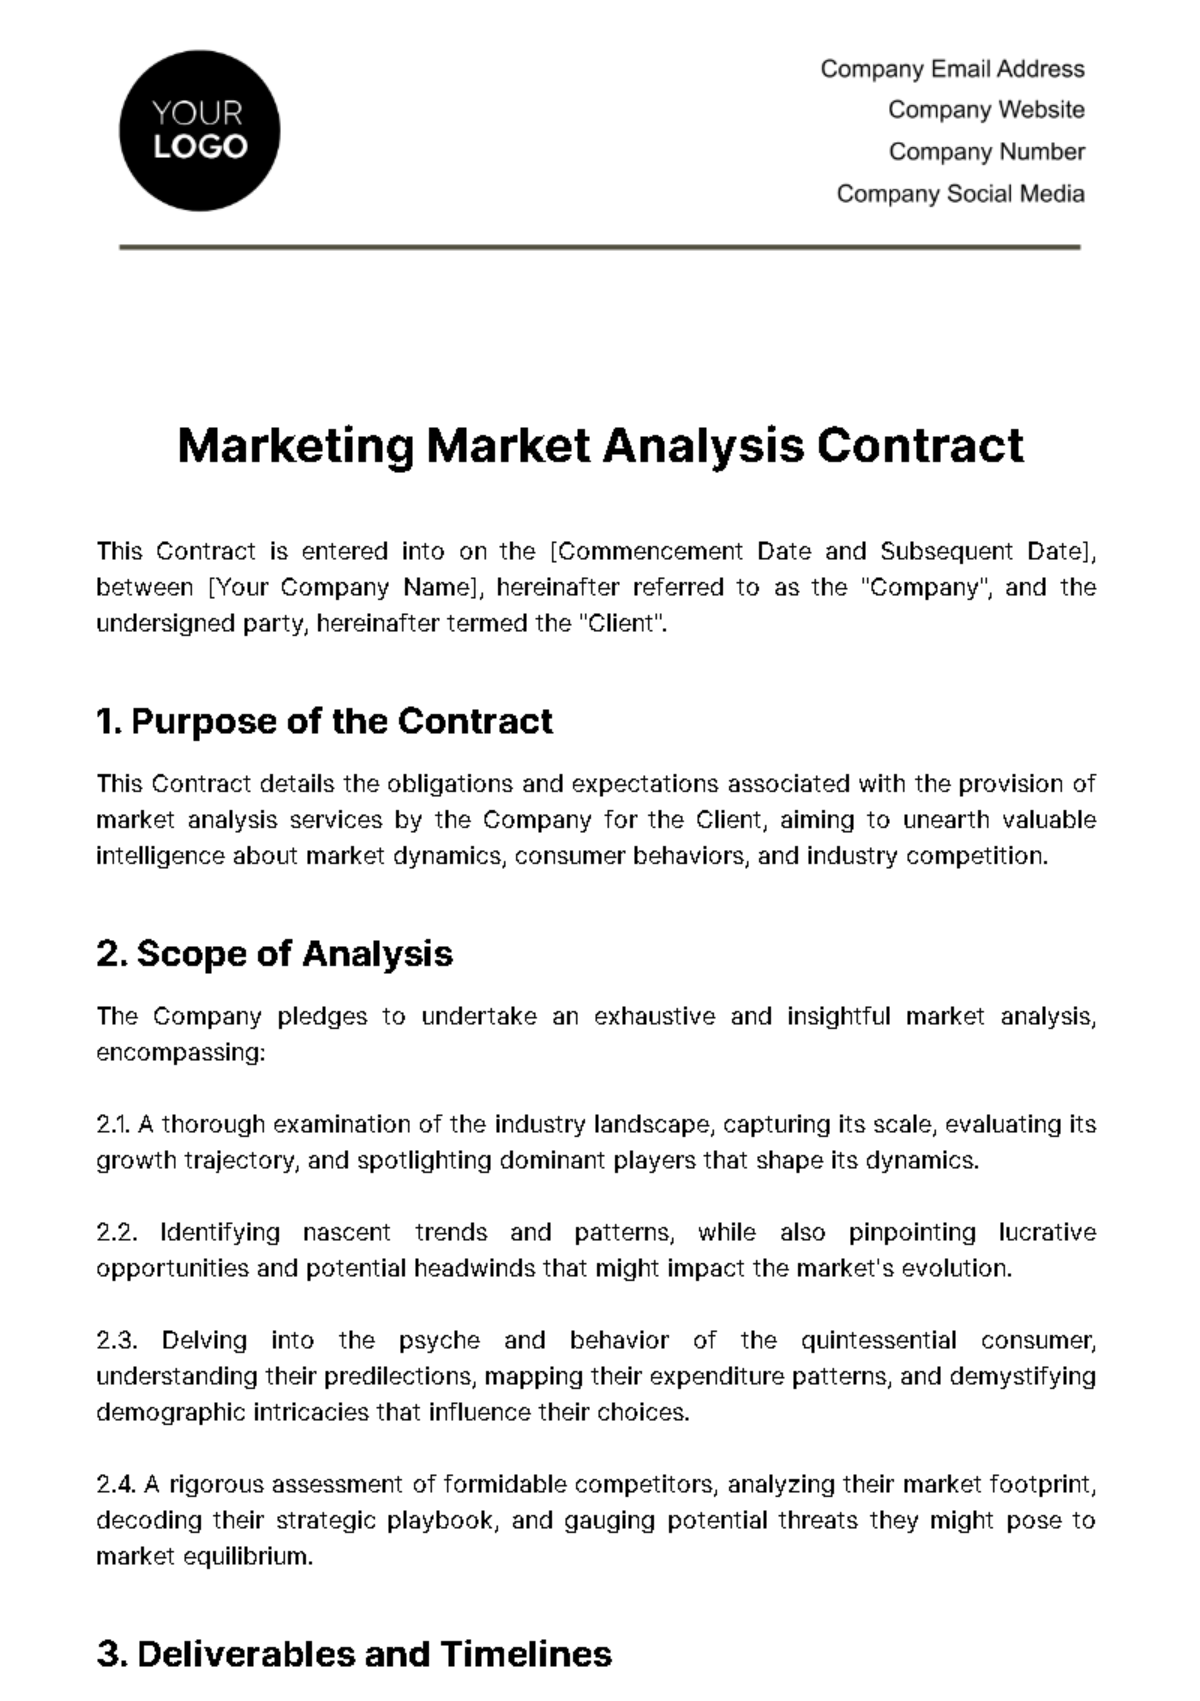 Marketing Market Analysis Contract Template